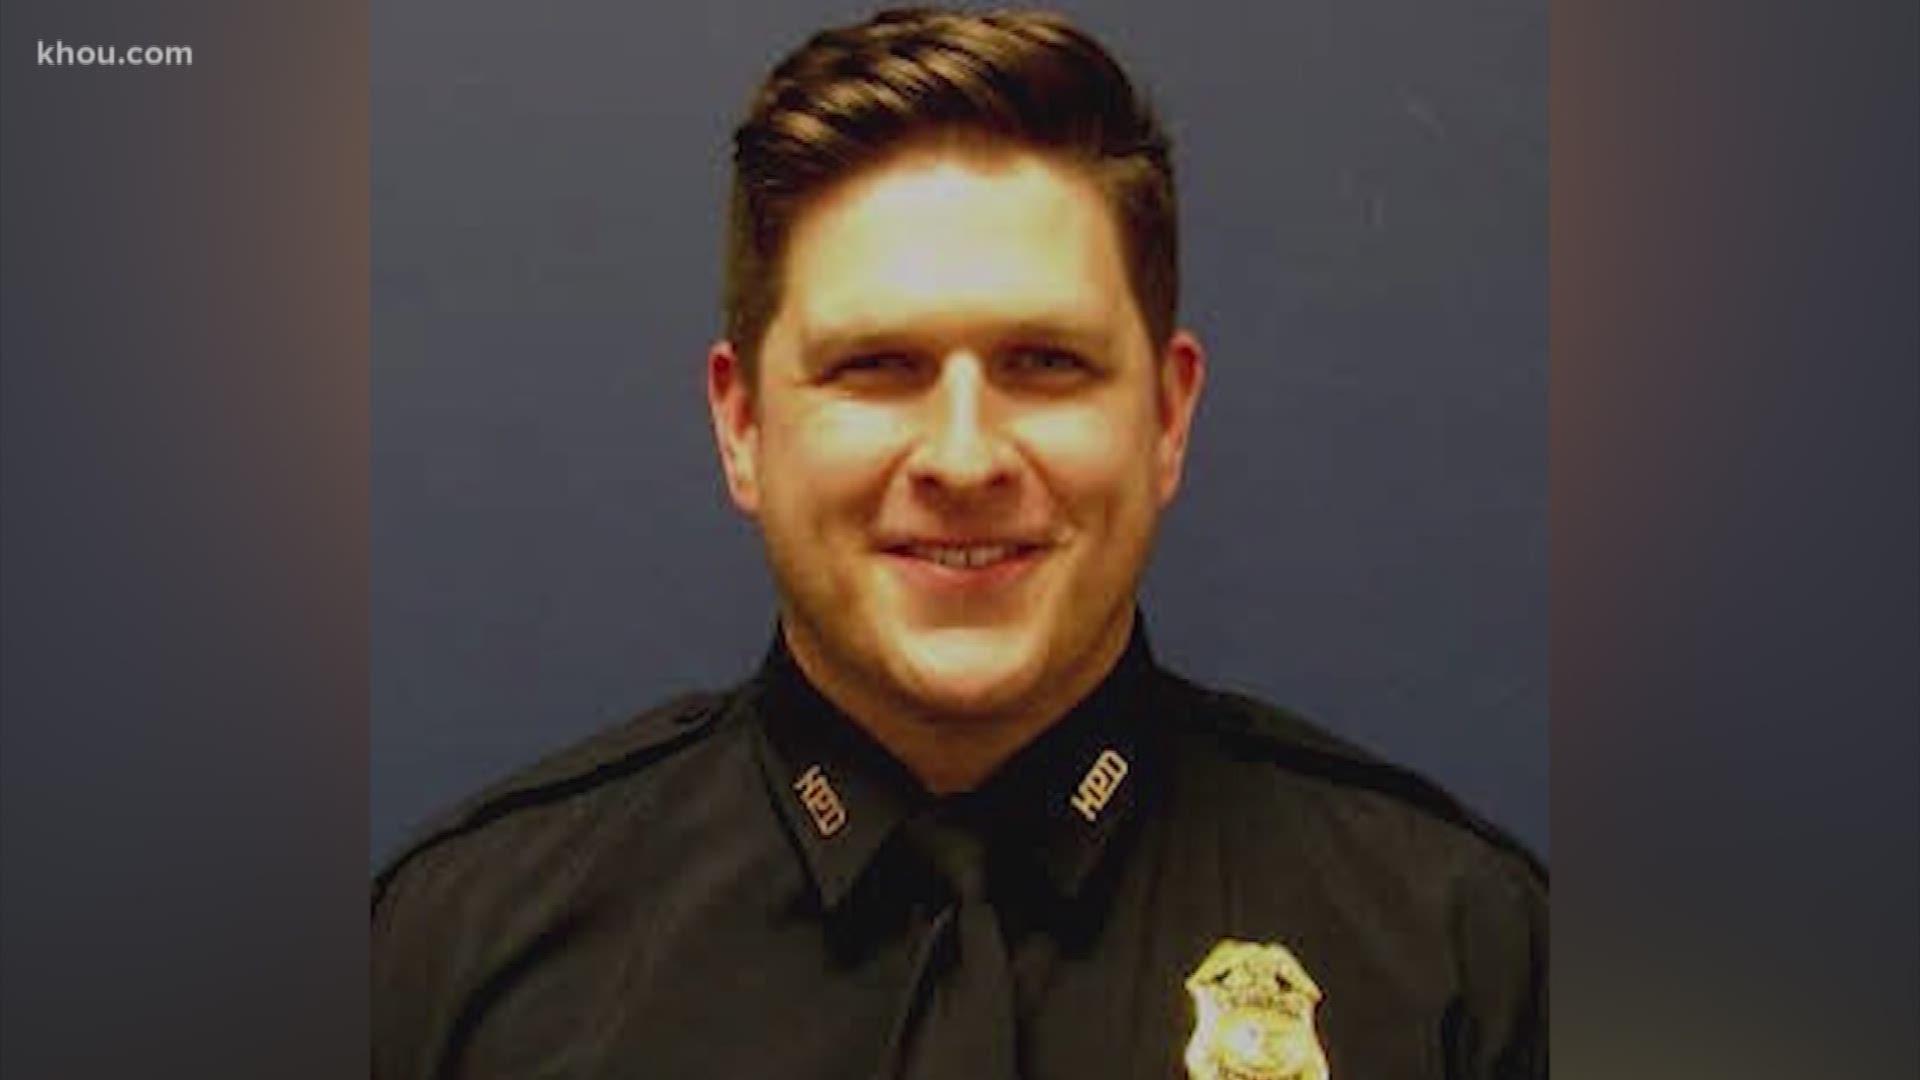 Houston police Sgt. Chris Brewster will be laid to rest Thursday morning, following a visitation Wednesday evening.